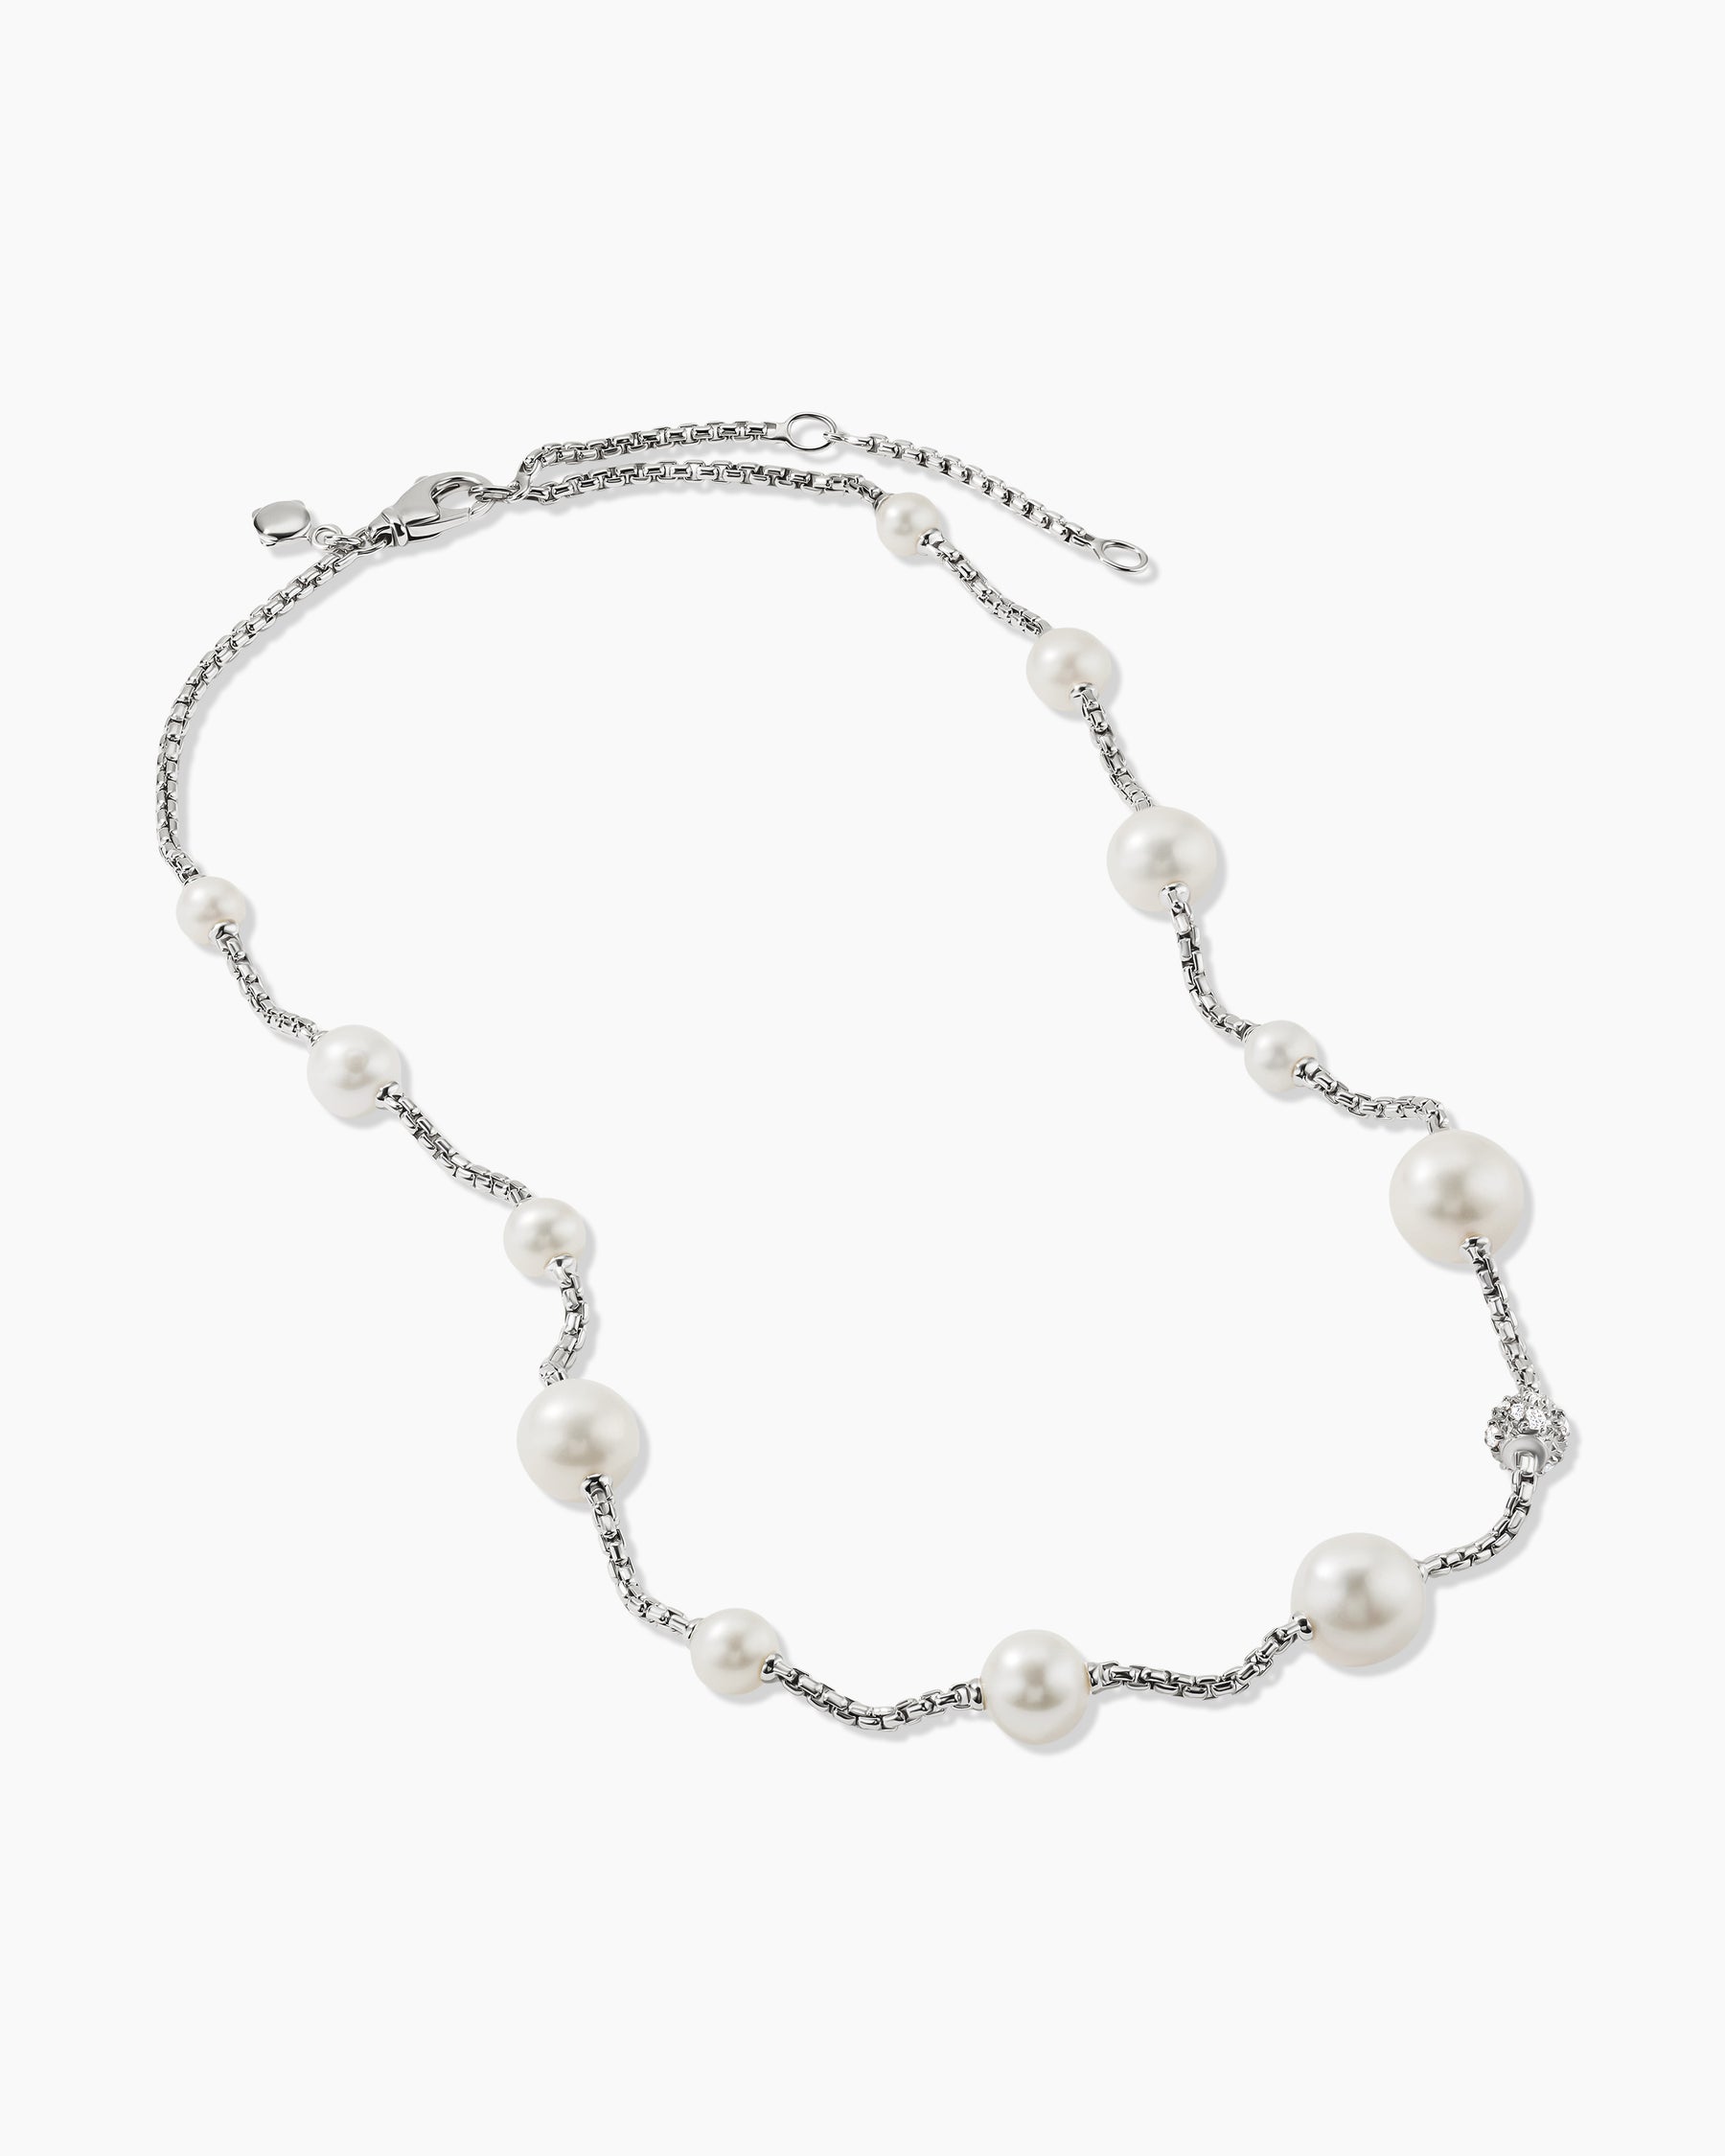 Twin Necklace with Freshwater Pearls on Nylon String and Sterling Silv –  Lireille